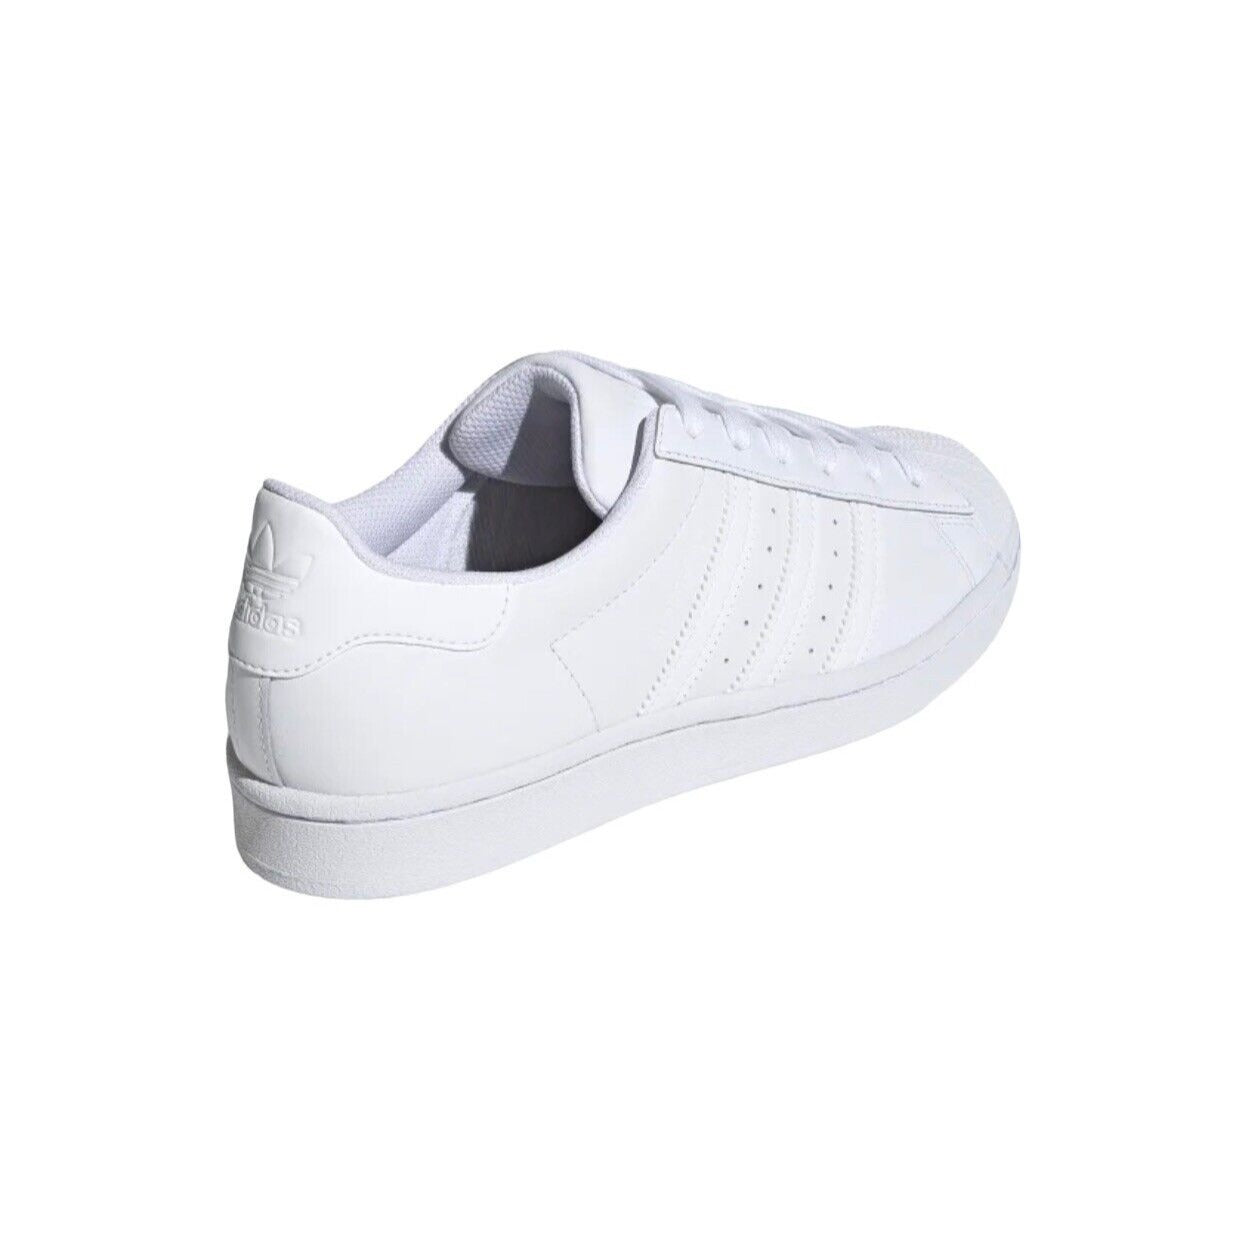 partial back and side view of white Adidas sneaker